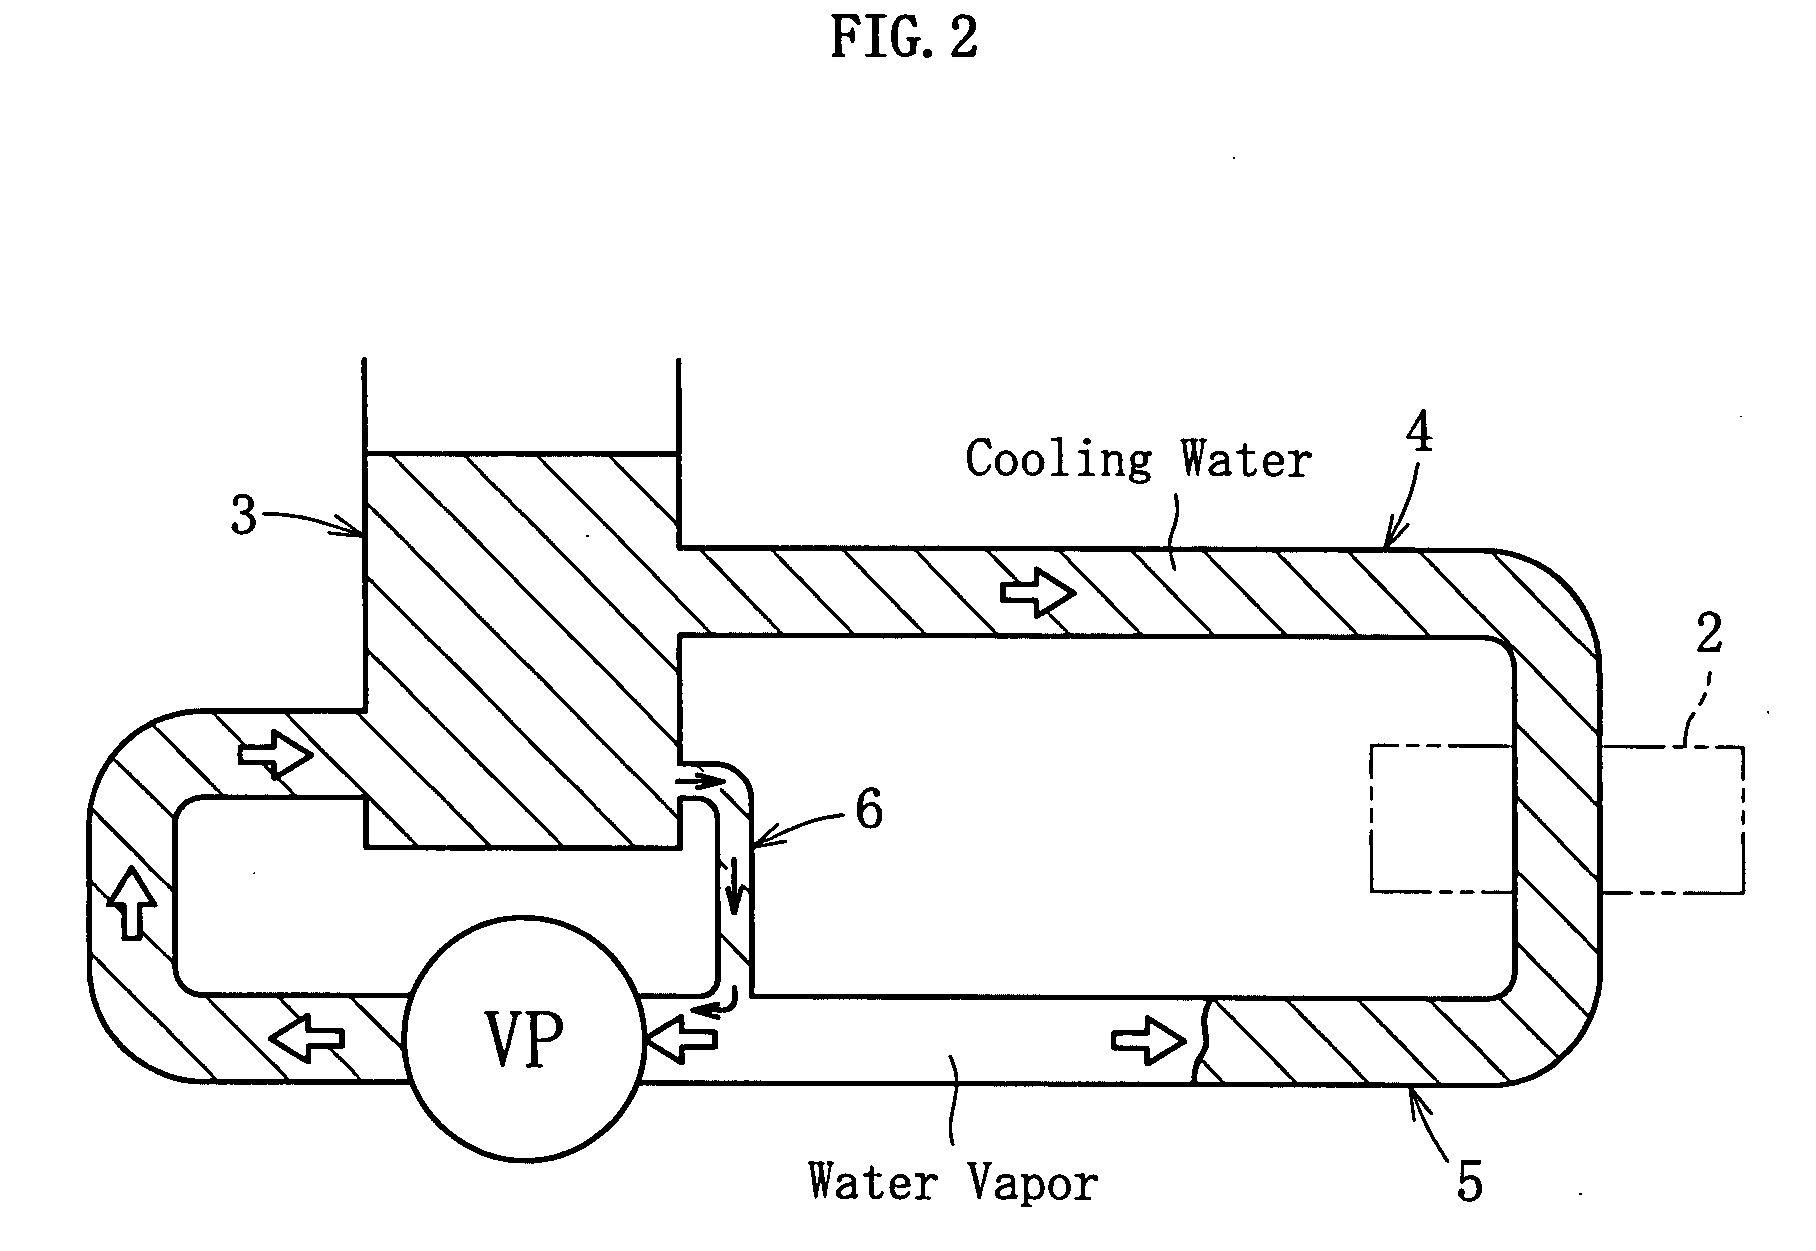 Mold cooling device